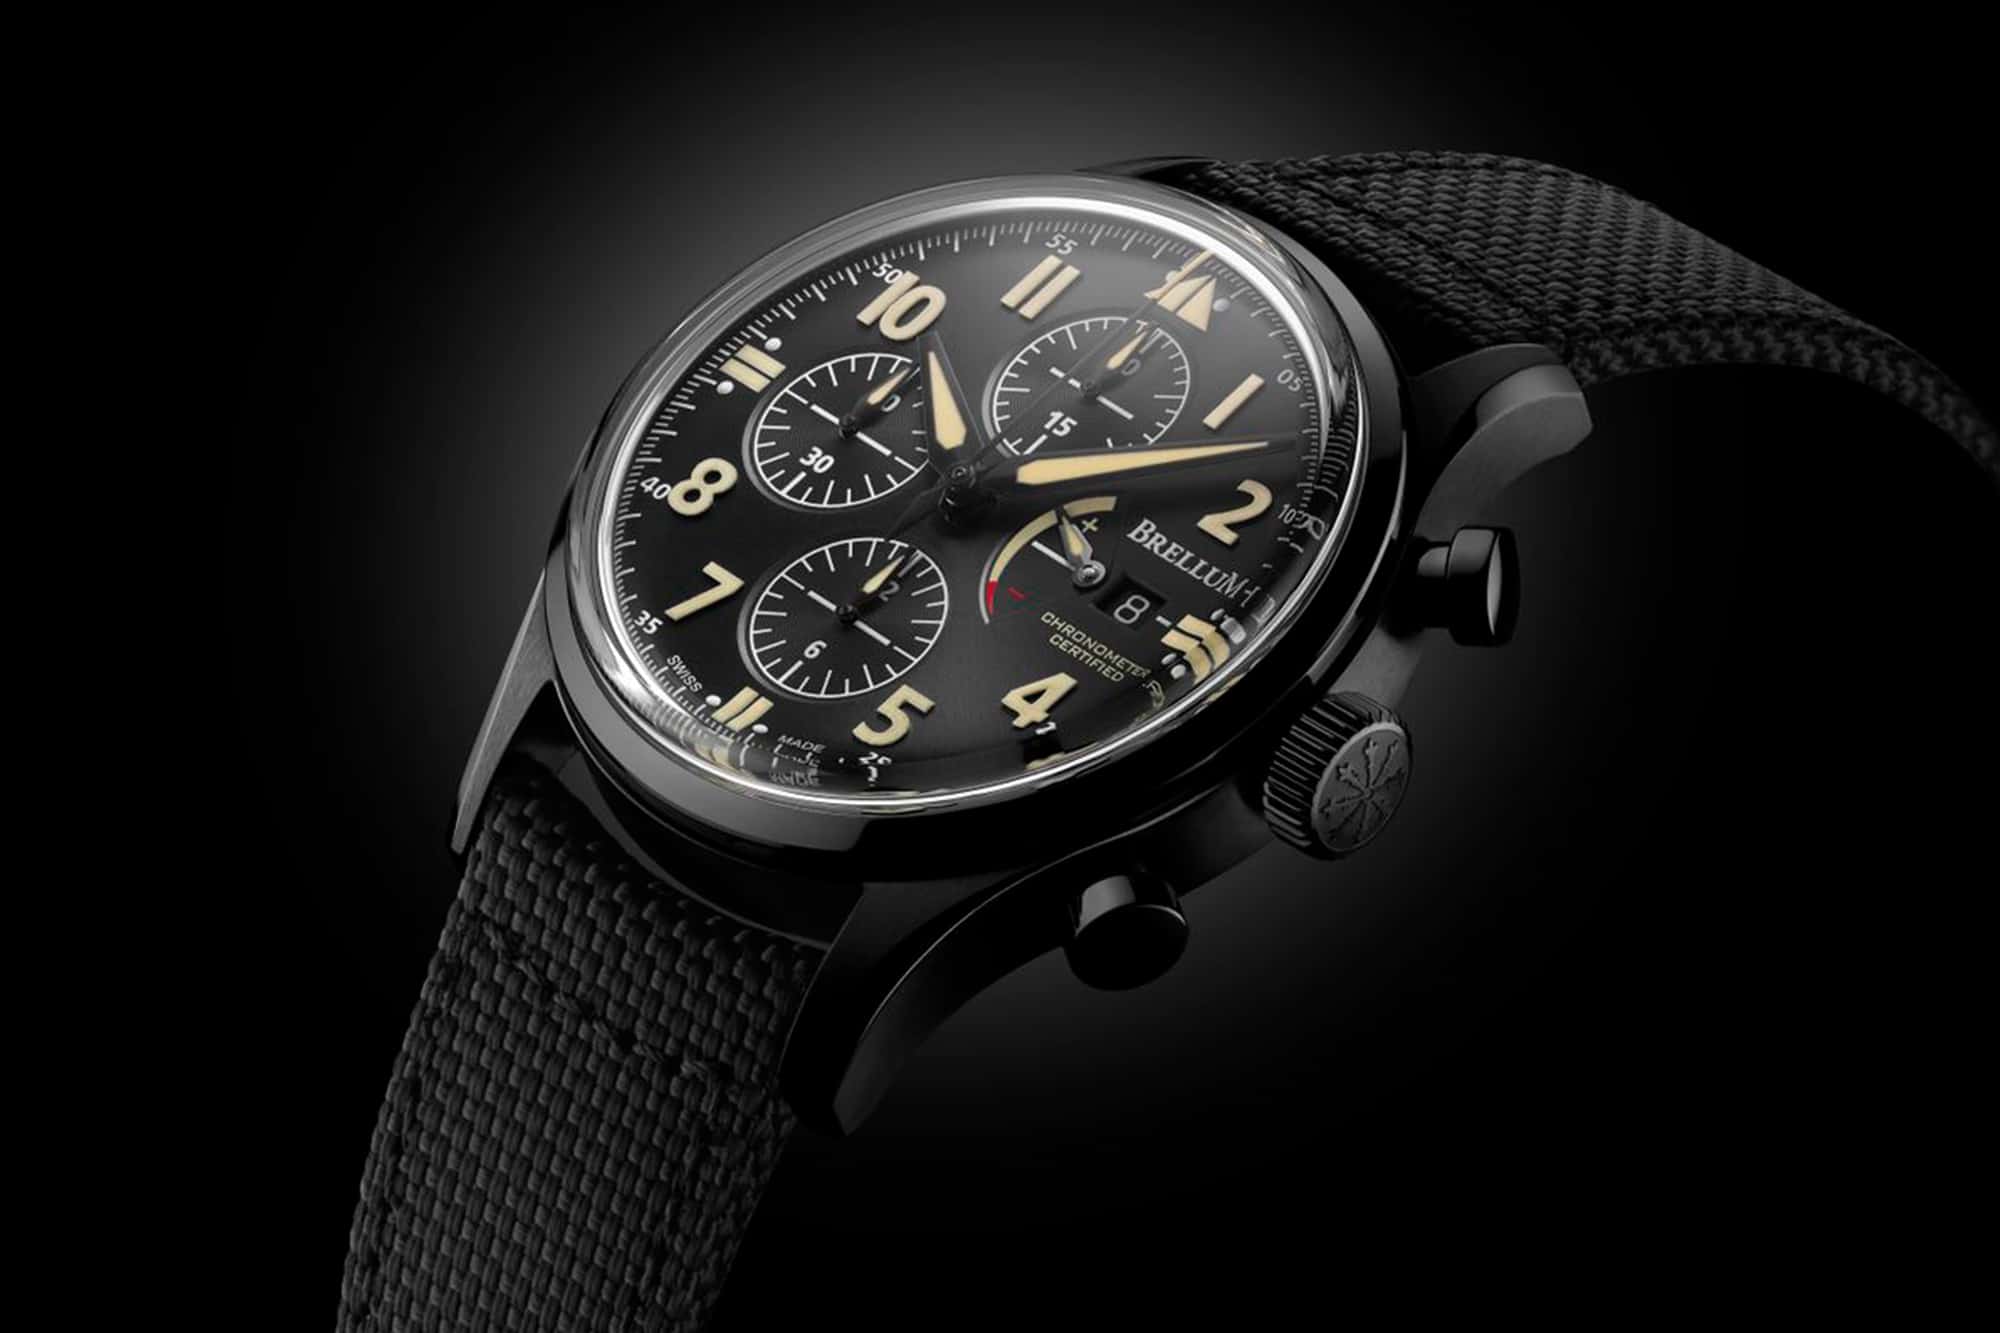 Brellum’s New Chronograph Is Designed to Make You Feel Like You’re in the Cockpit